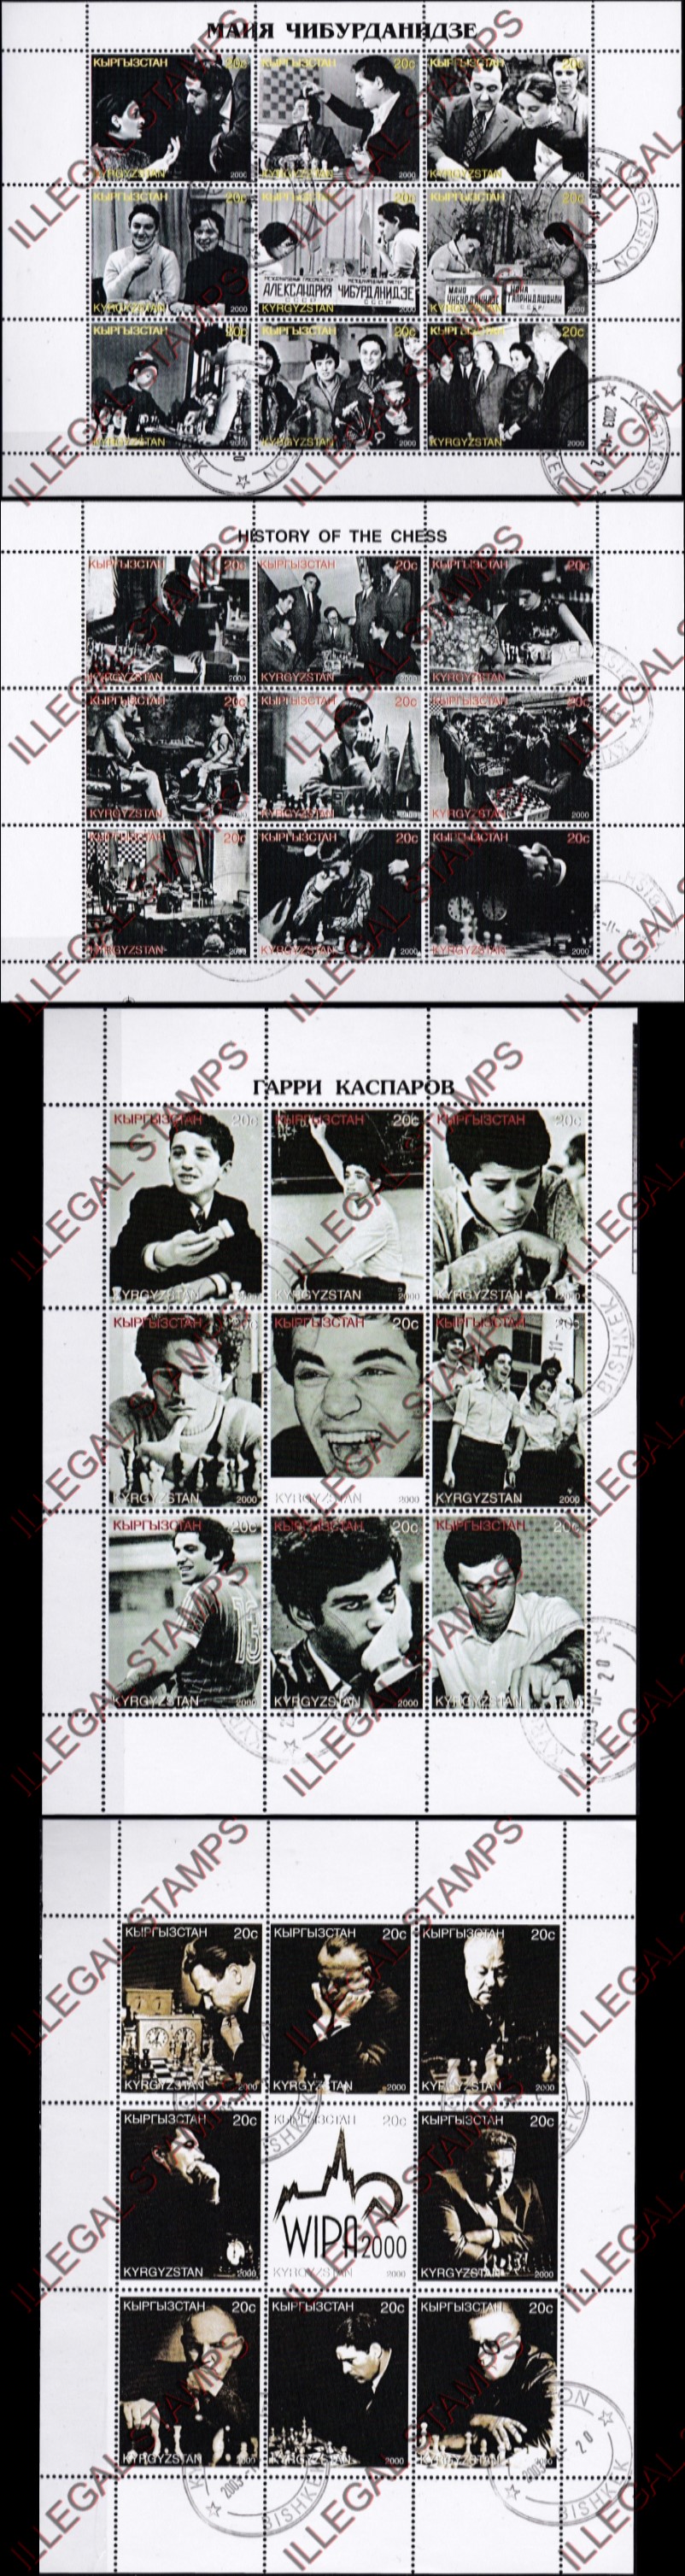 Kyrgyzstan 2000 Chess Illegal Stamp Sheetlets of Nine (Group 1)